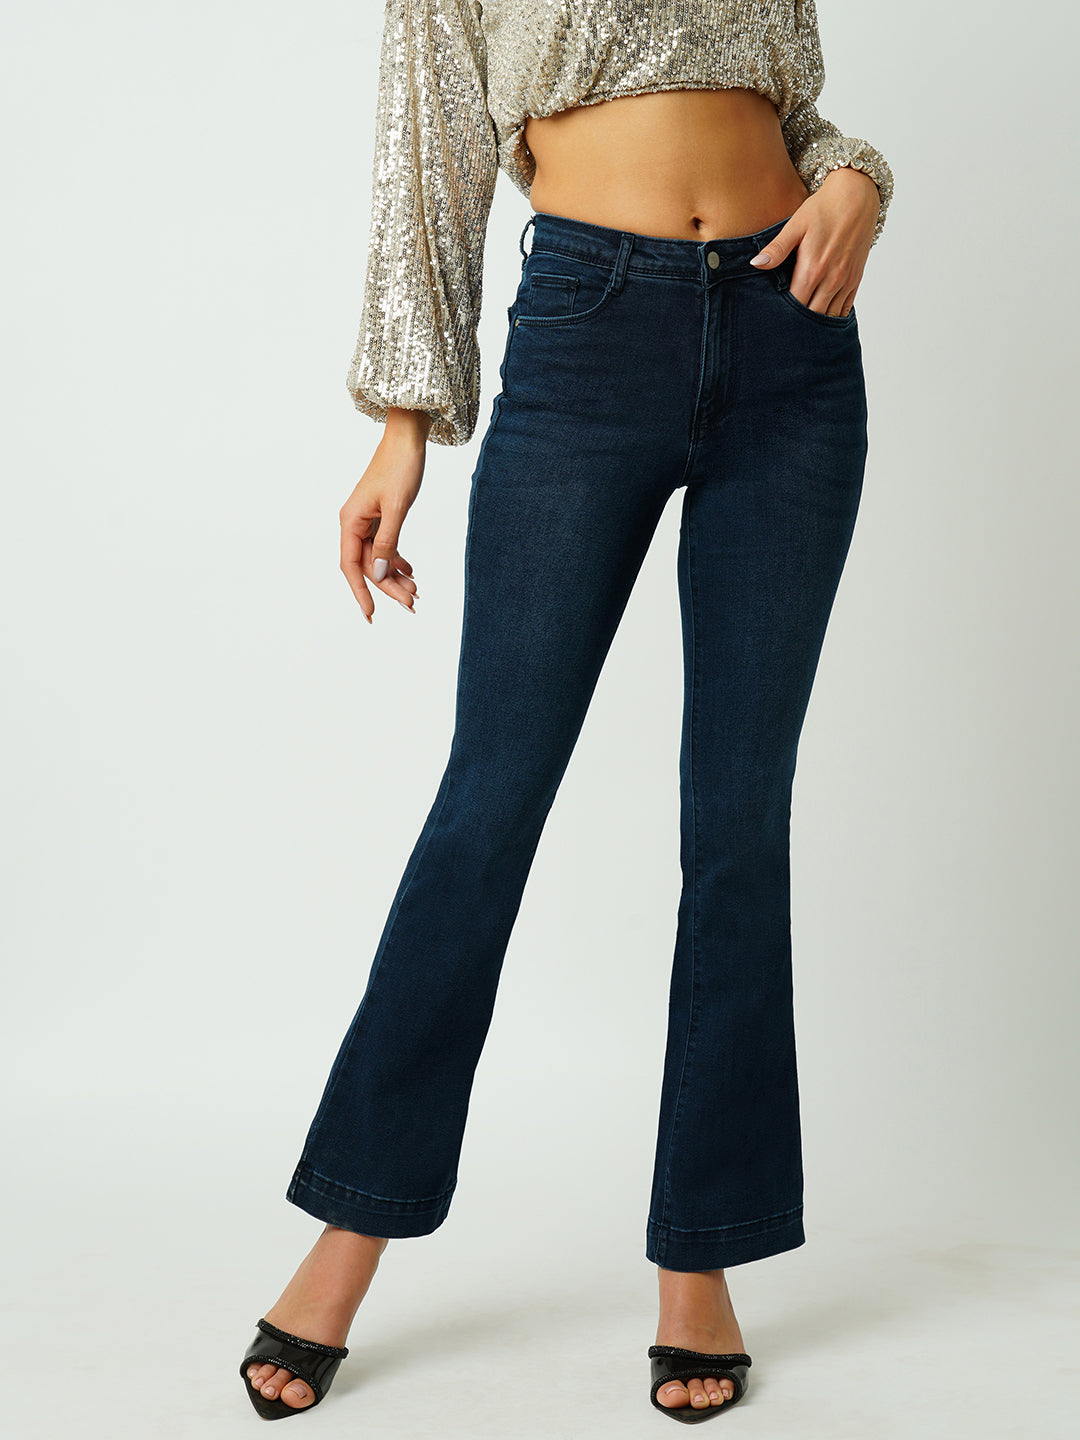 Shop High Rise Flare Jeans for Women Online at best price - Kraus